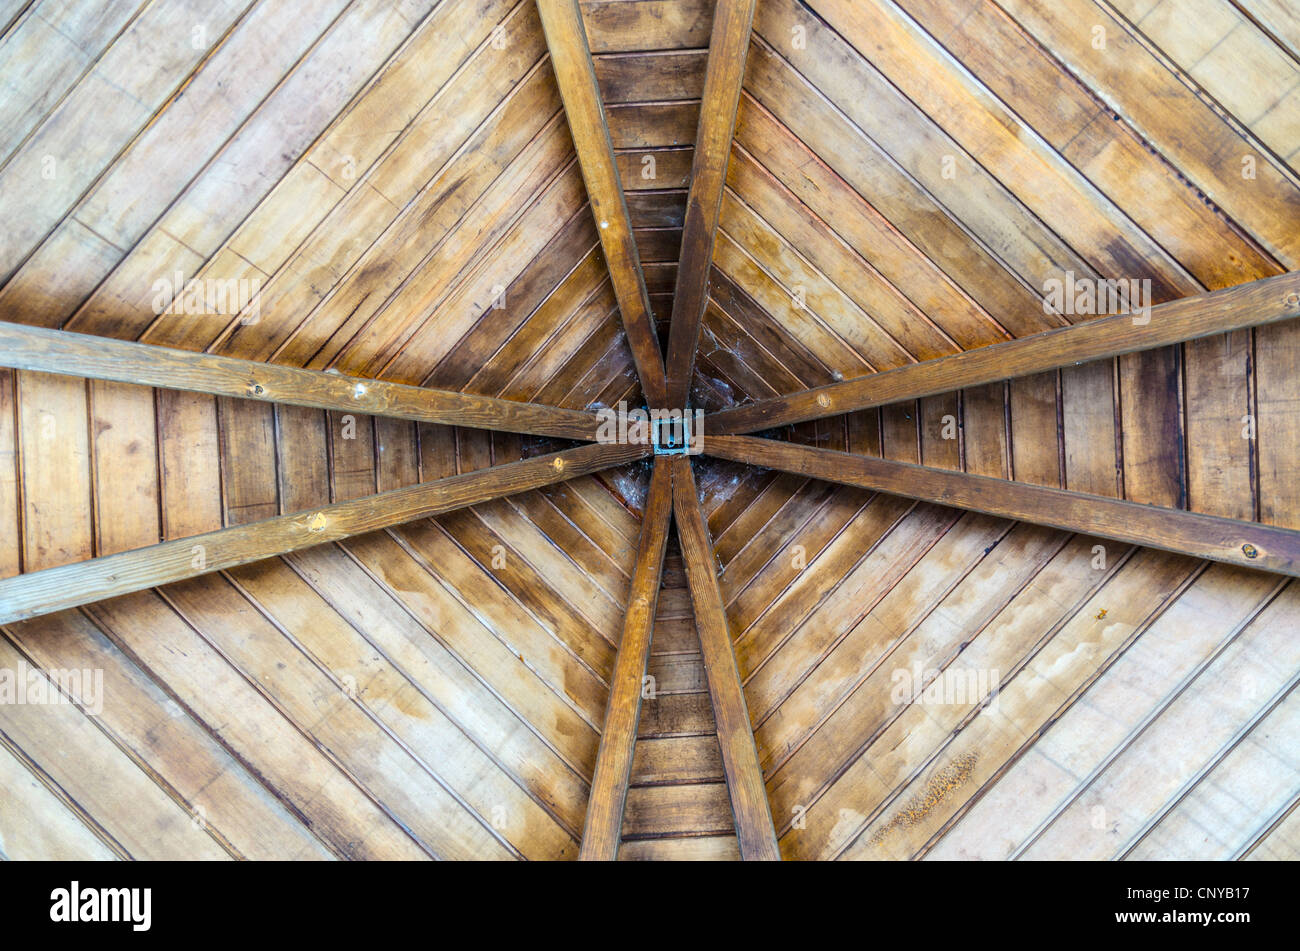 Wooden ceiling. Stock Photo